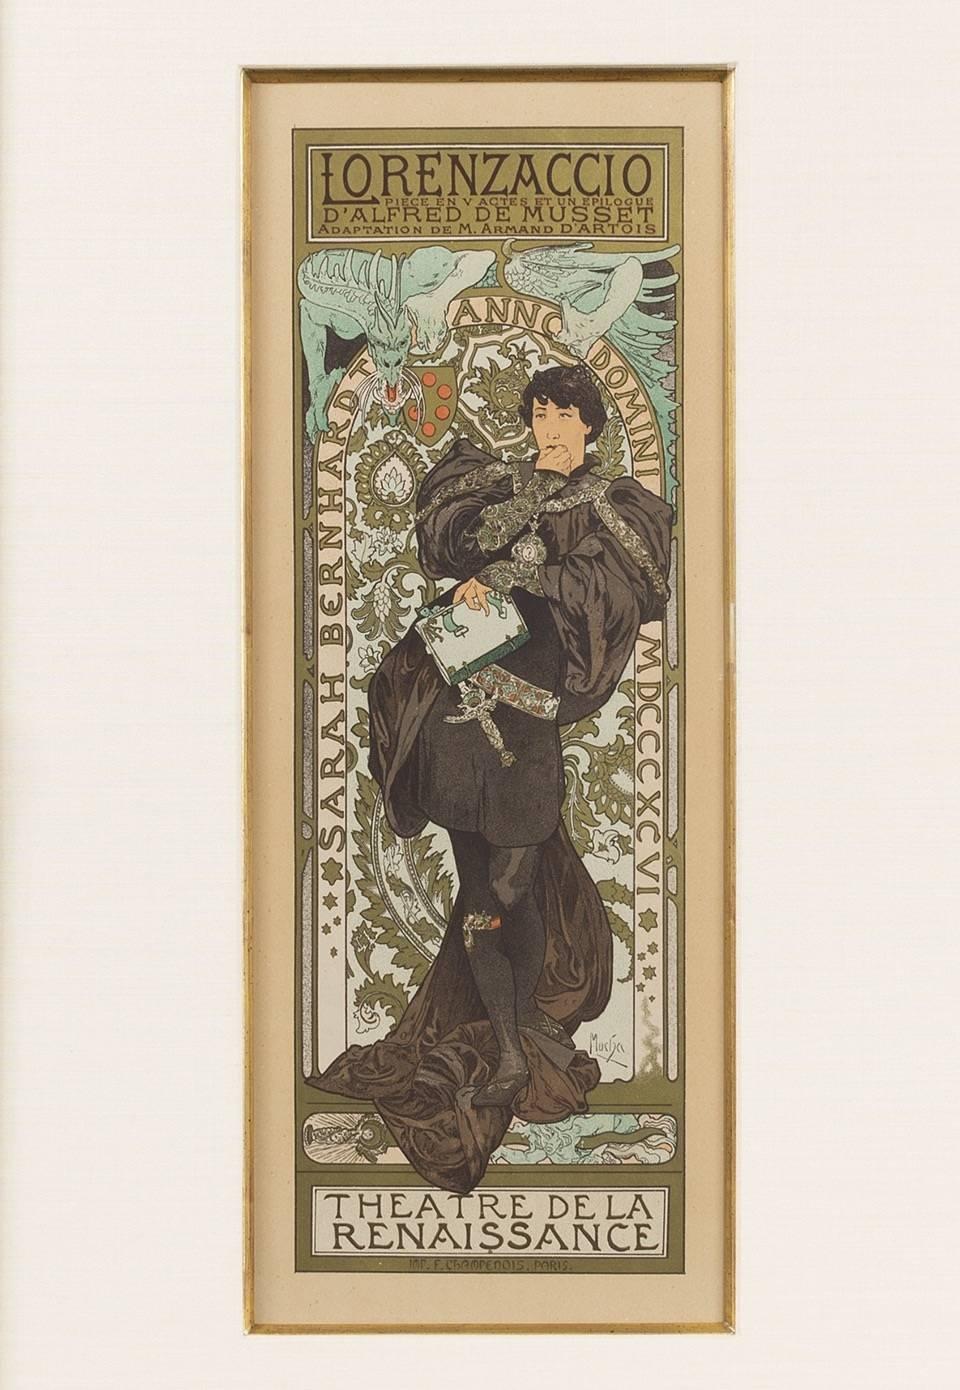 A French Art Nouveau lithograph by Alphonse Mucha titled Lorenzaccio, from Maitre de L'Affiche. The poster was designed by Mucha for the play 